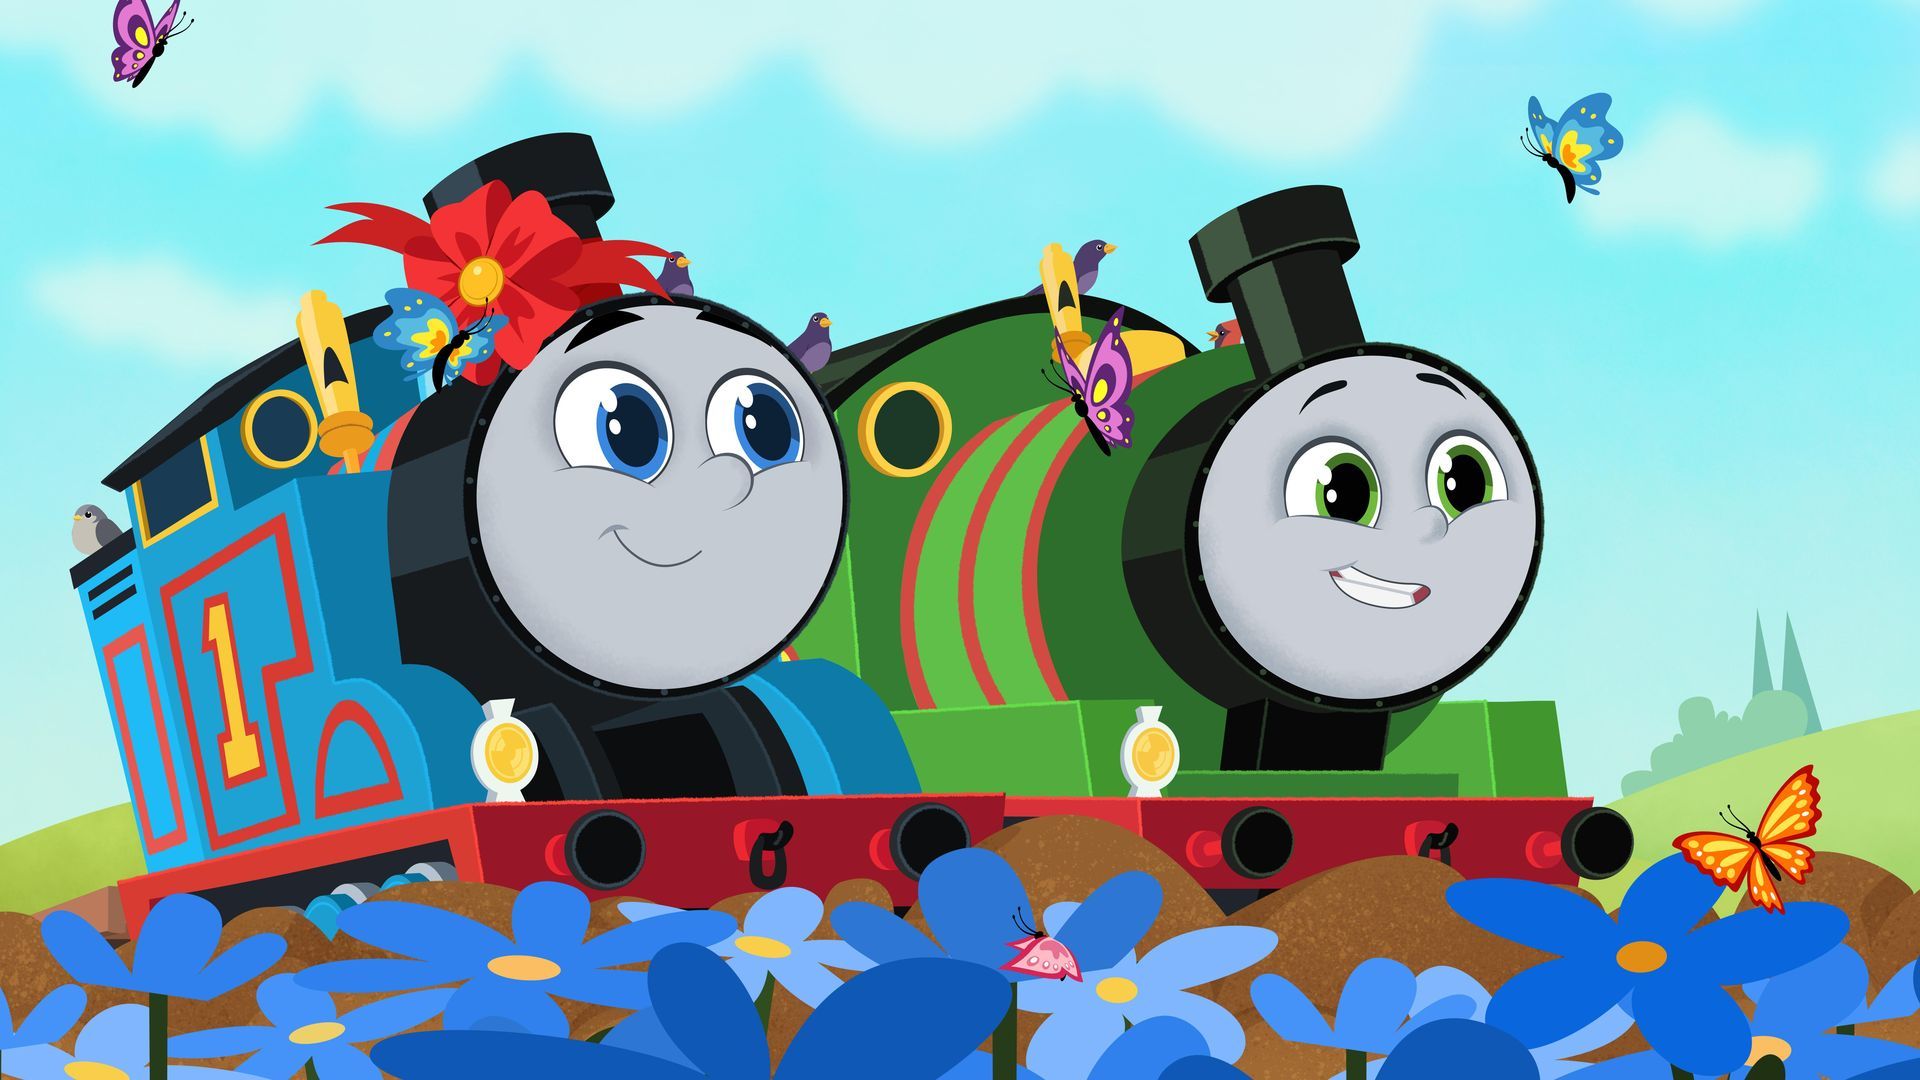 Thomas and Friends: All Engines Go!, ABC iview